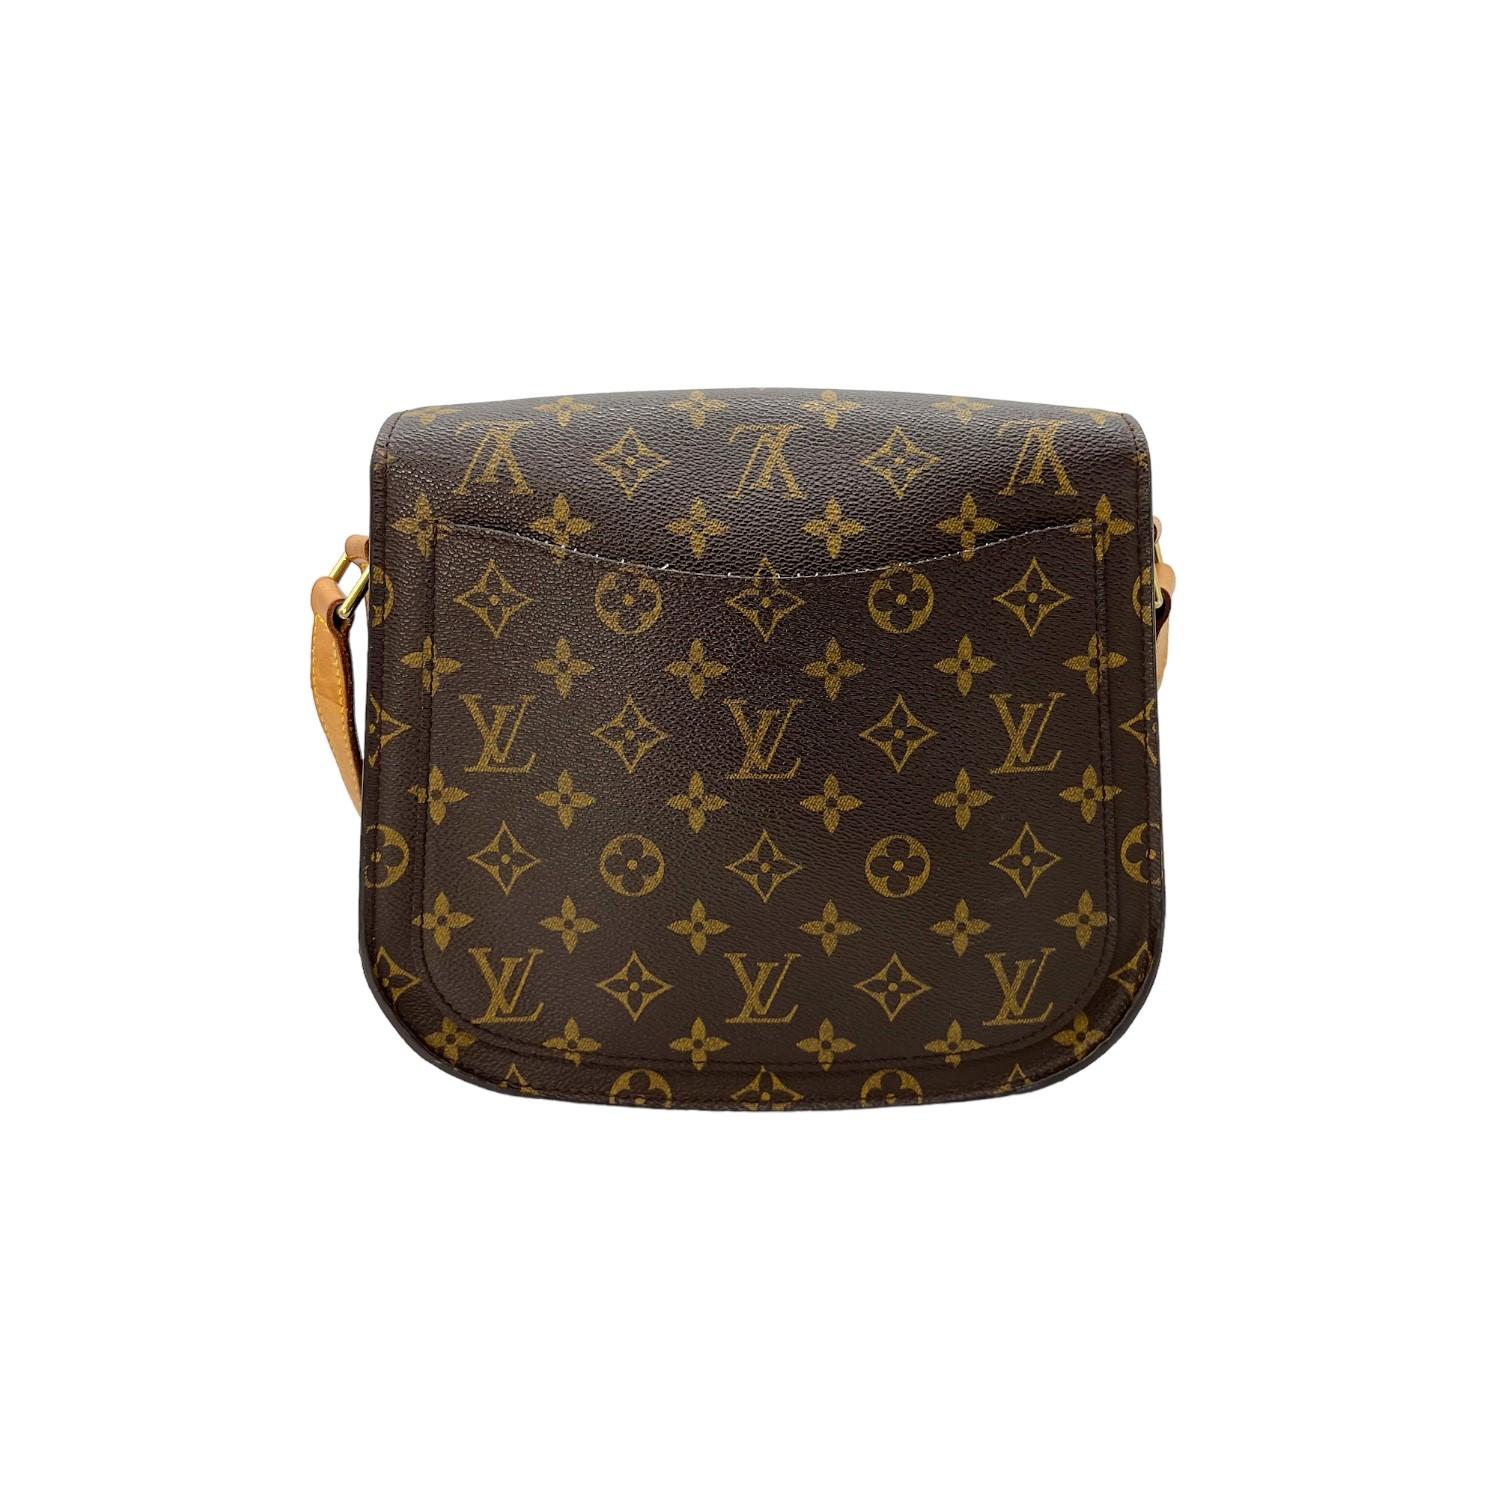 This Louis Vuitton Monogram Saint Cloud GM was made in France in 2002 and it is finely crafted of the iconic Louis Vuitton Monogram coated canvas with leather trimming and gold-tone hardware features. It has a flat leather adjustable shoulder strap.